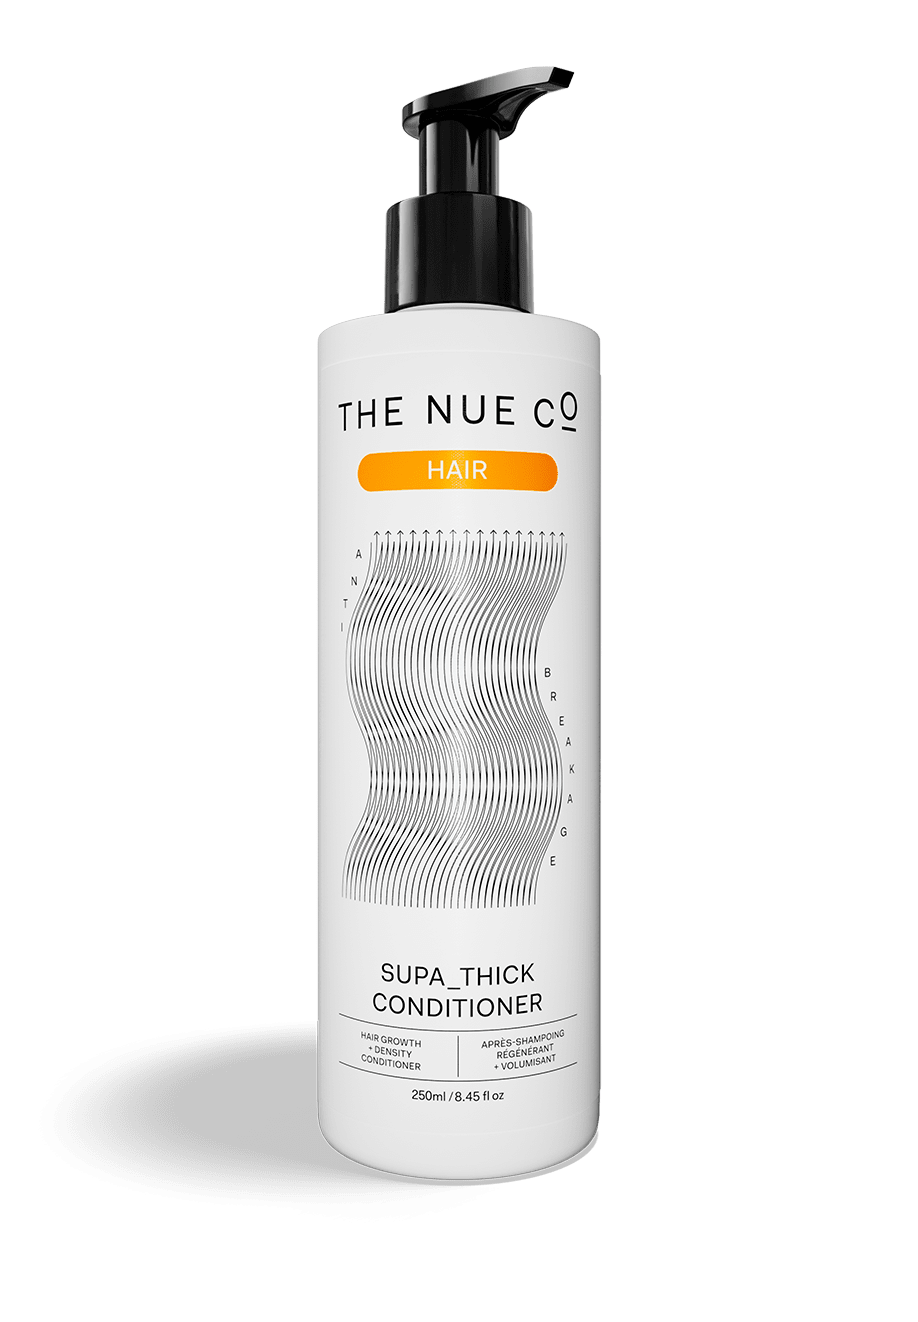 SUPA_THICK CONDITIONER The Nue Co. 